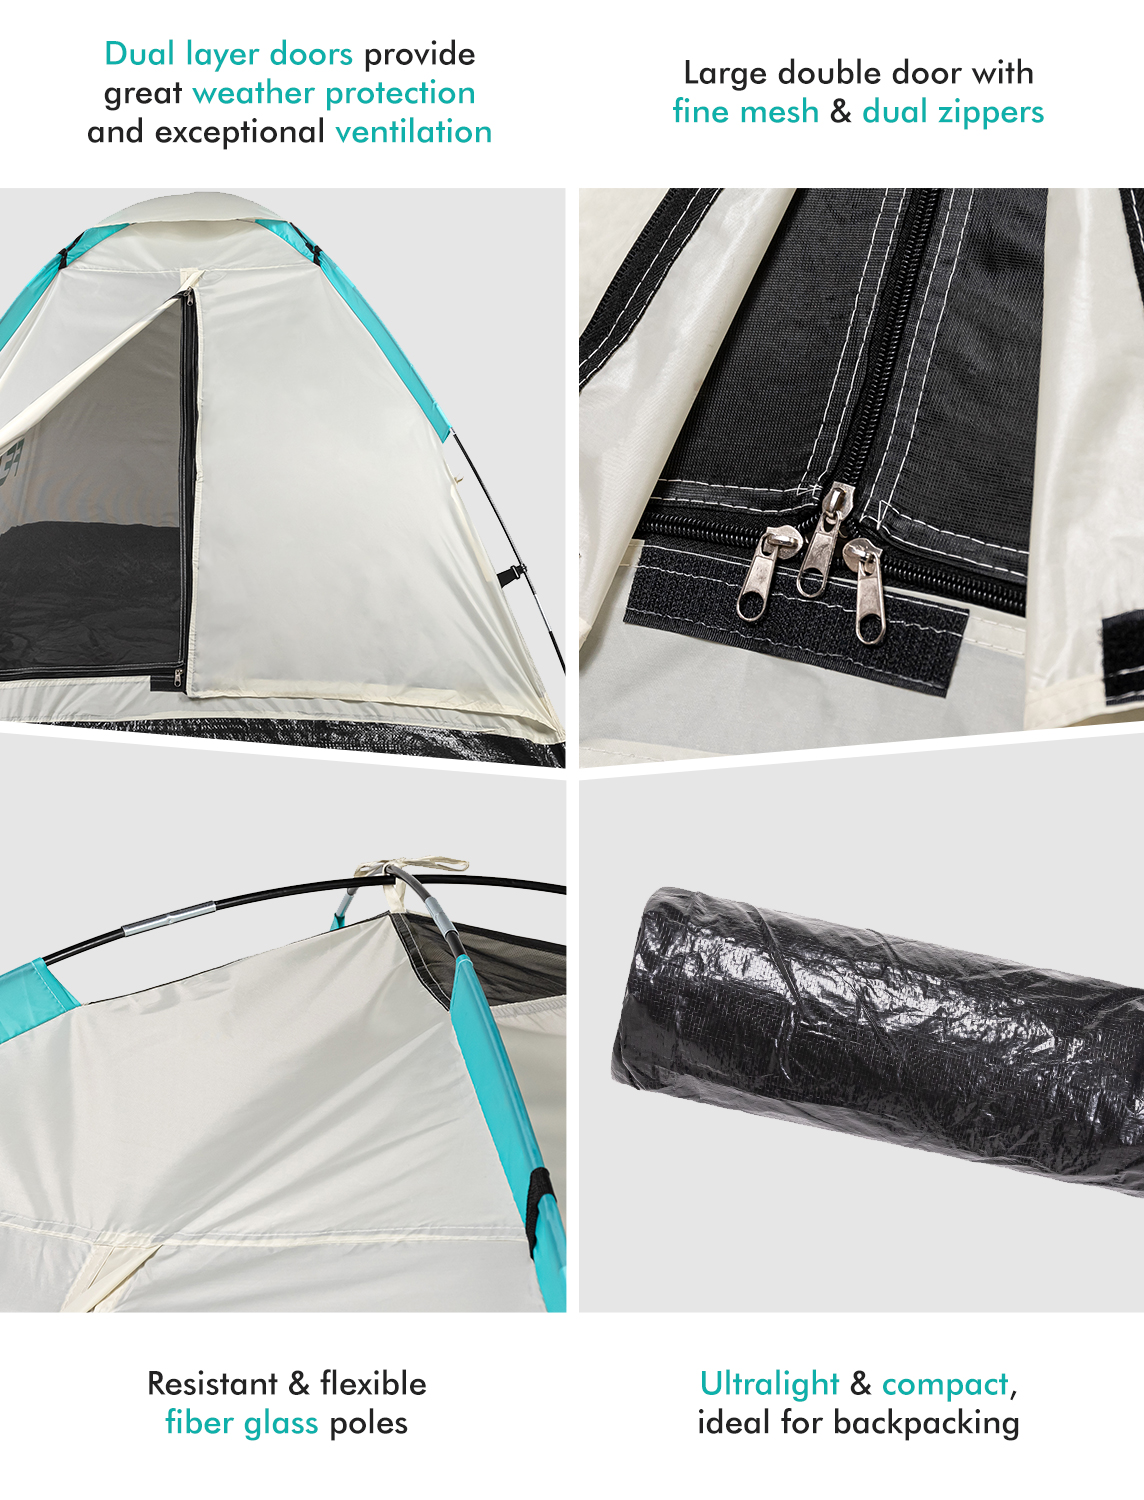 FE Active - 1 to 2 Person Tent with Screened Entrance and Easy Quick Setup That is Water Resistant for Outdoors， Camping， Backpacking， Hiking， Trekking | Designed in California， USA